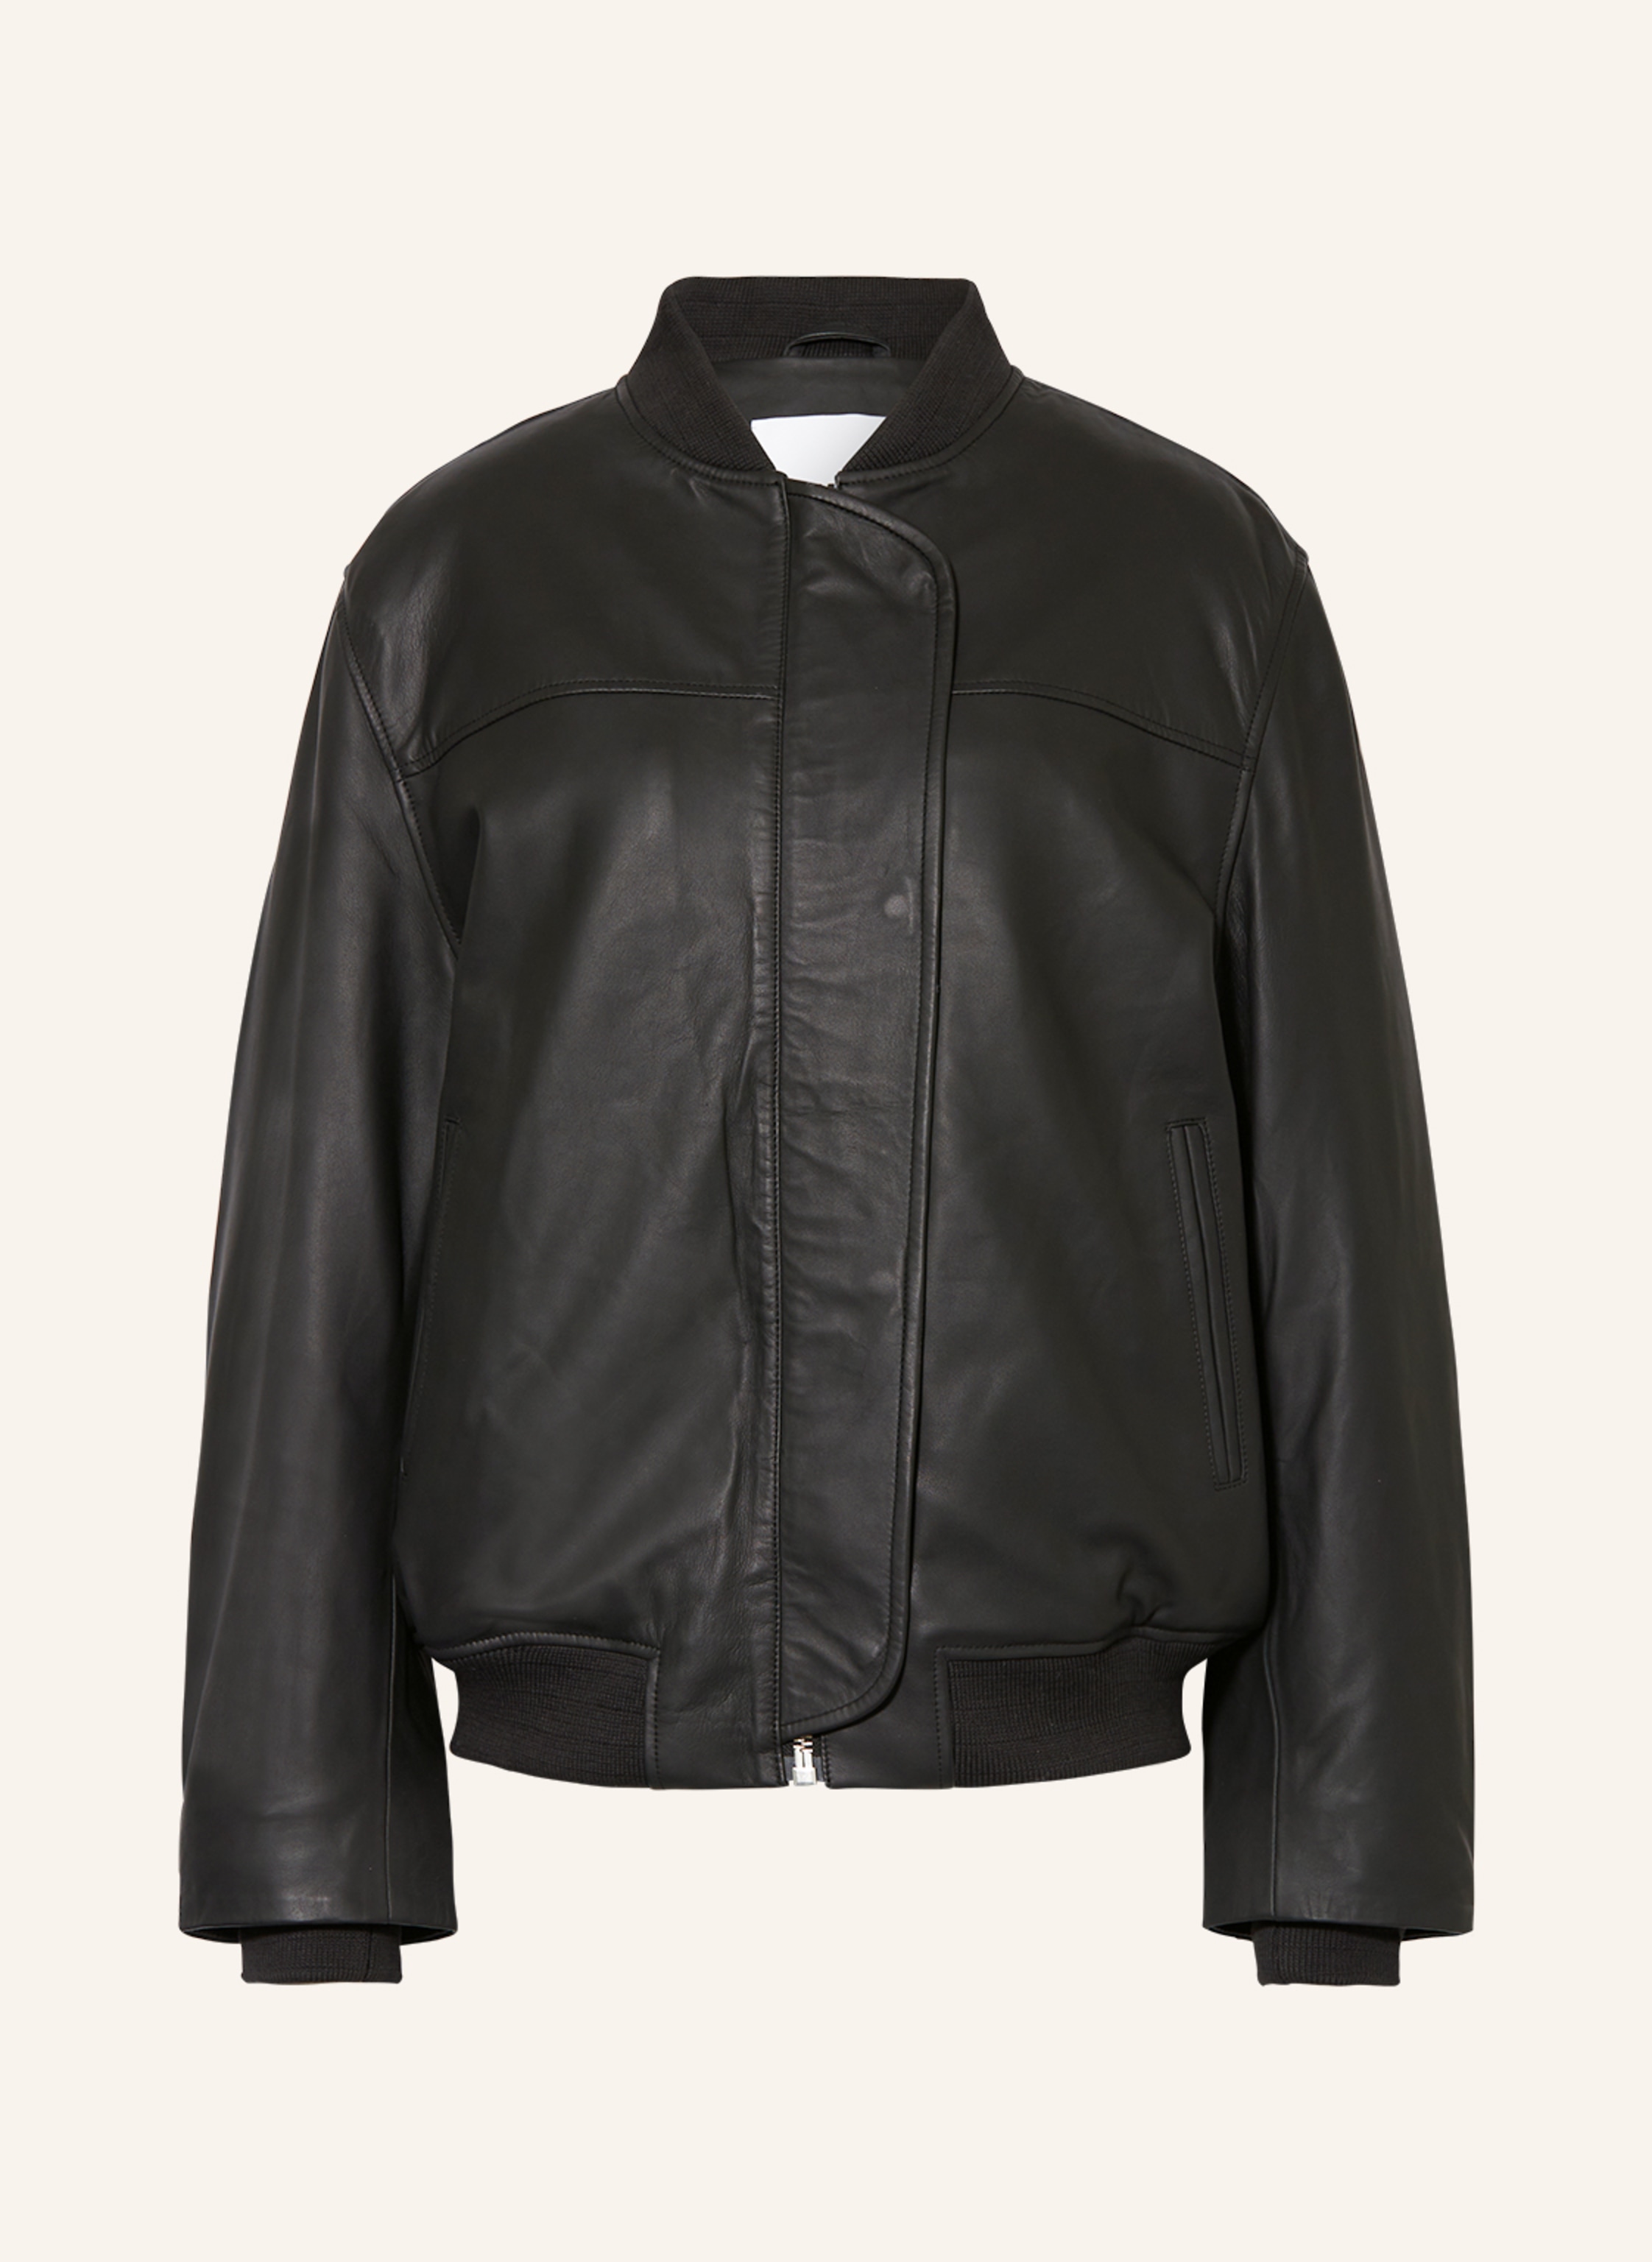 REMAIN Oversized bomber jacket made of leather in black